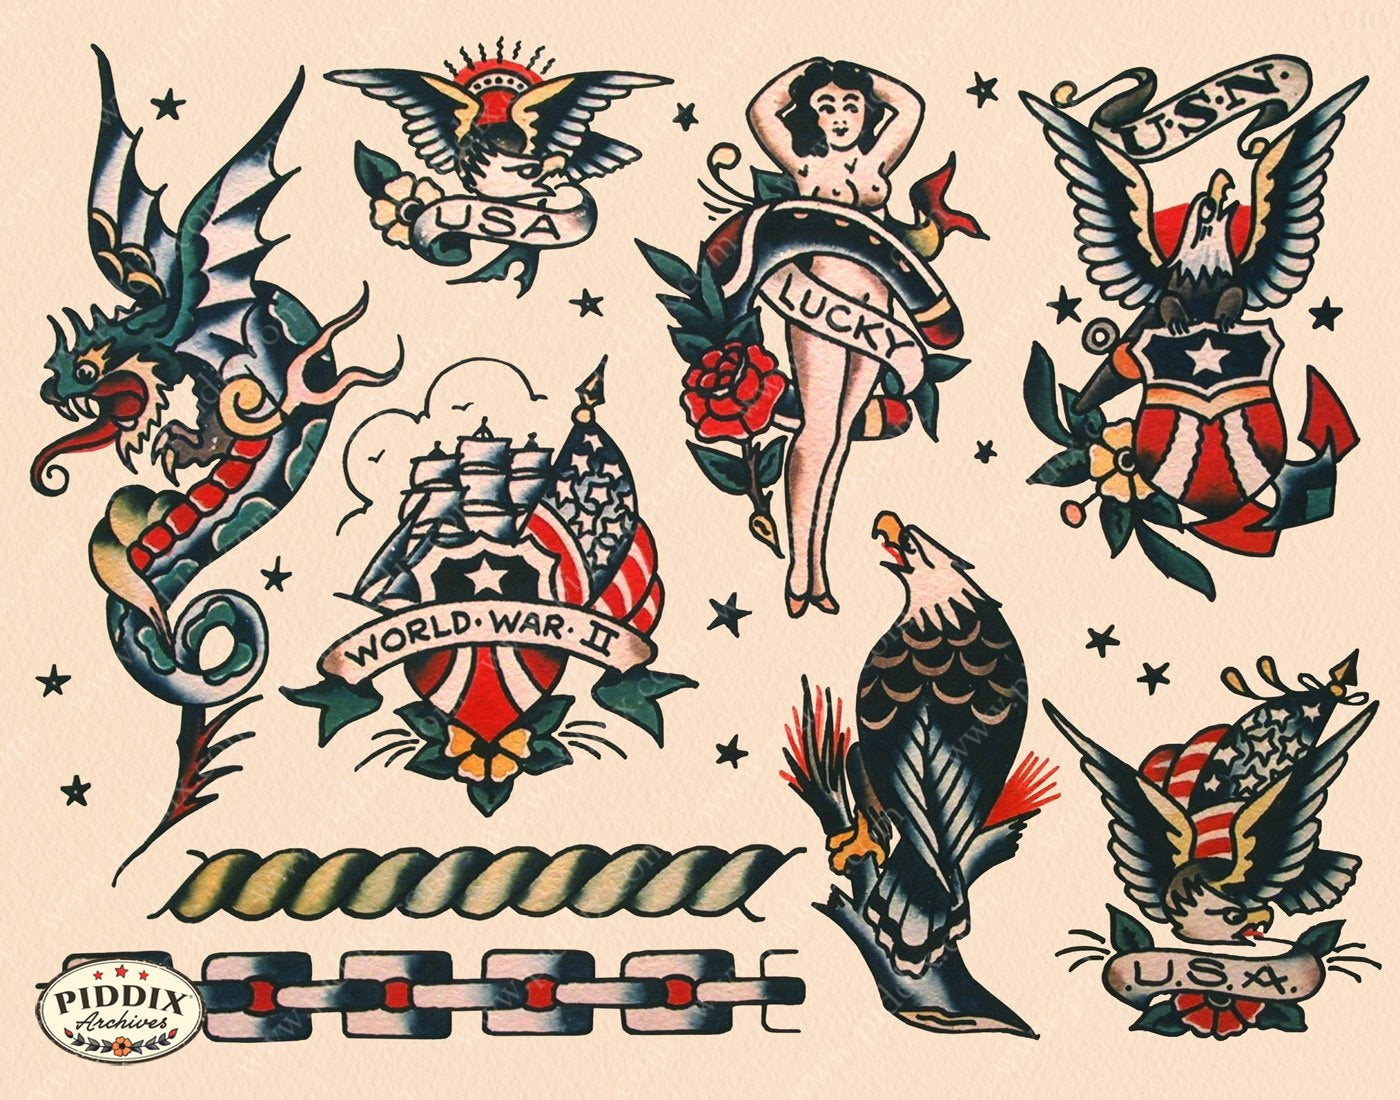 Amazon.com : Sailor Jerry Traditional Vintage Style Tattoo Flash 6 Sheets  11x14 Old School Great For Tattoo Shop Display, Sign, Artwork, Pinup Girl  Set 1 : Beauty & Personal Care